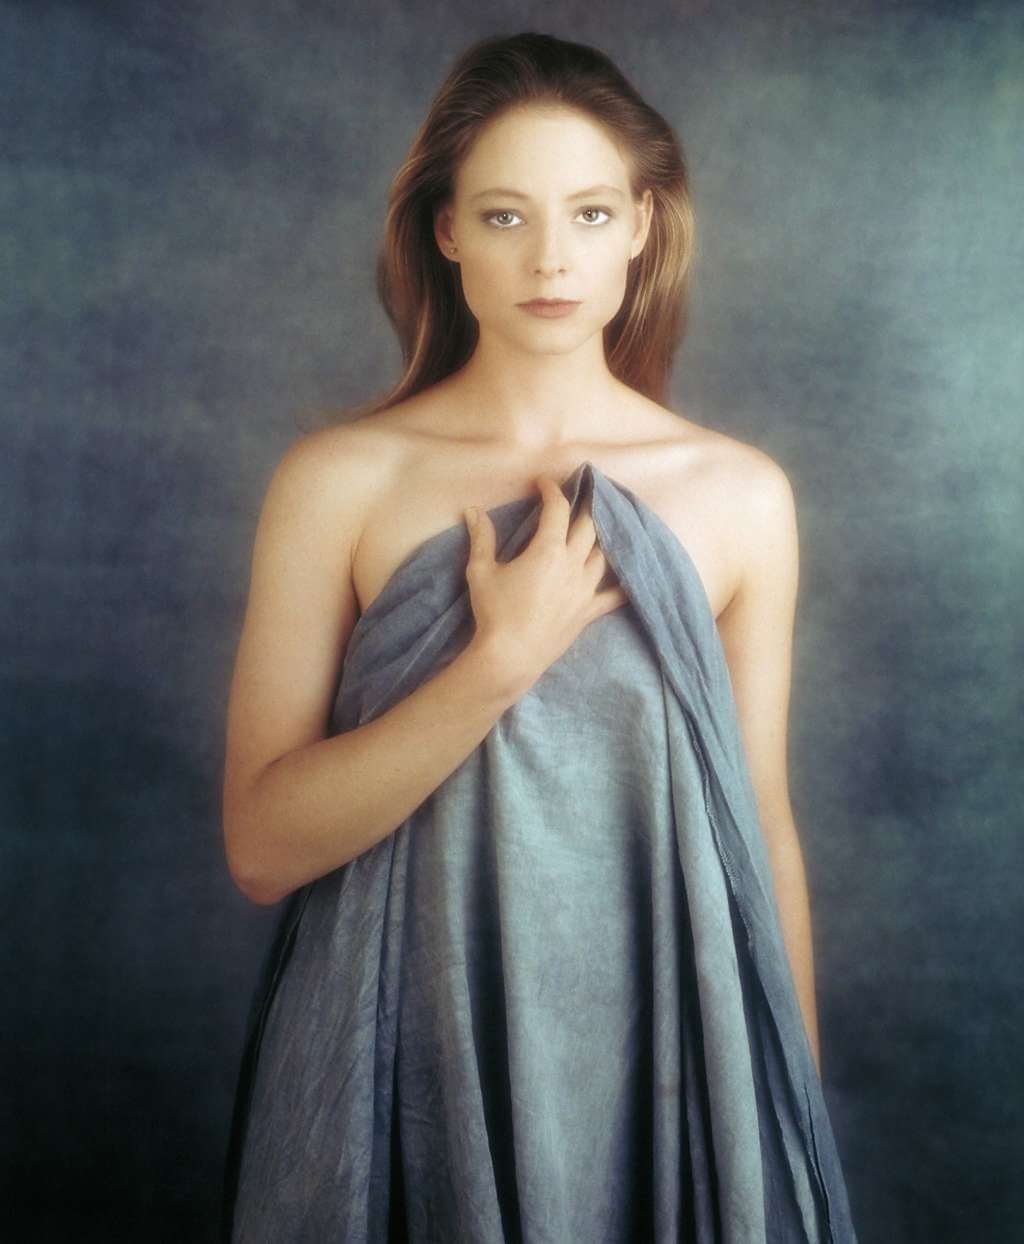 60+ Hot Pictures Of Jodie Foster That Will Make Your Heart Thump For Her | Best Of Comic Books